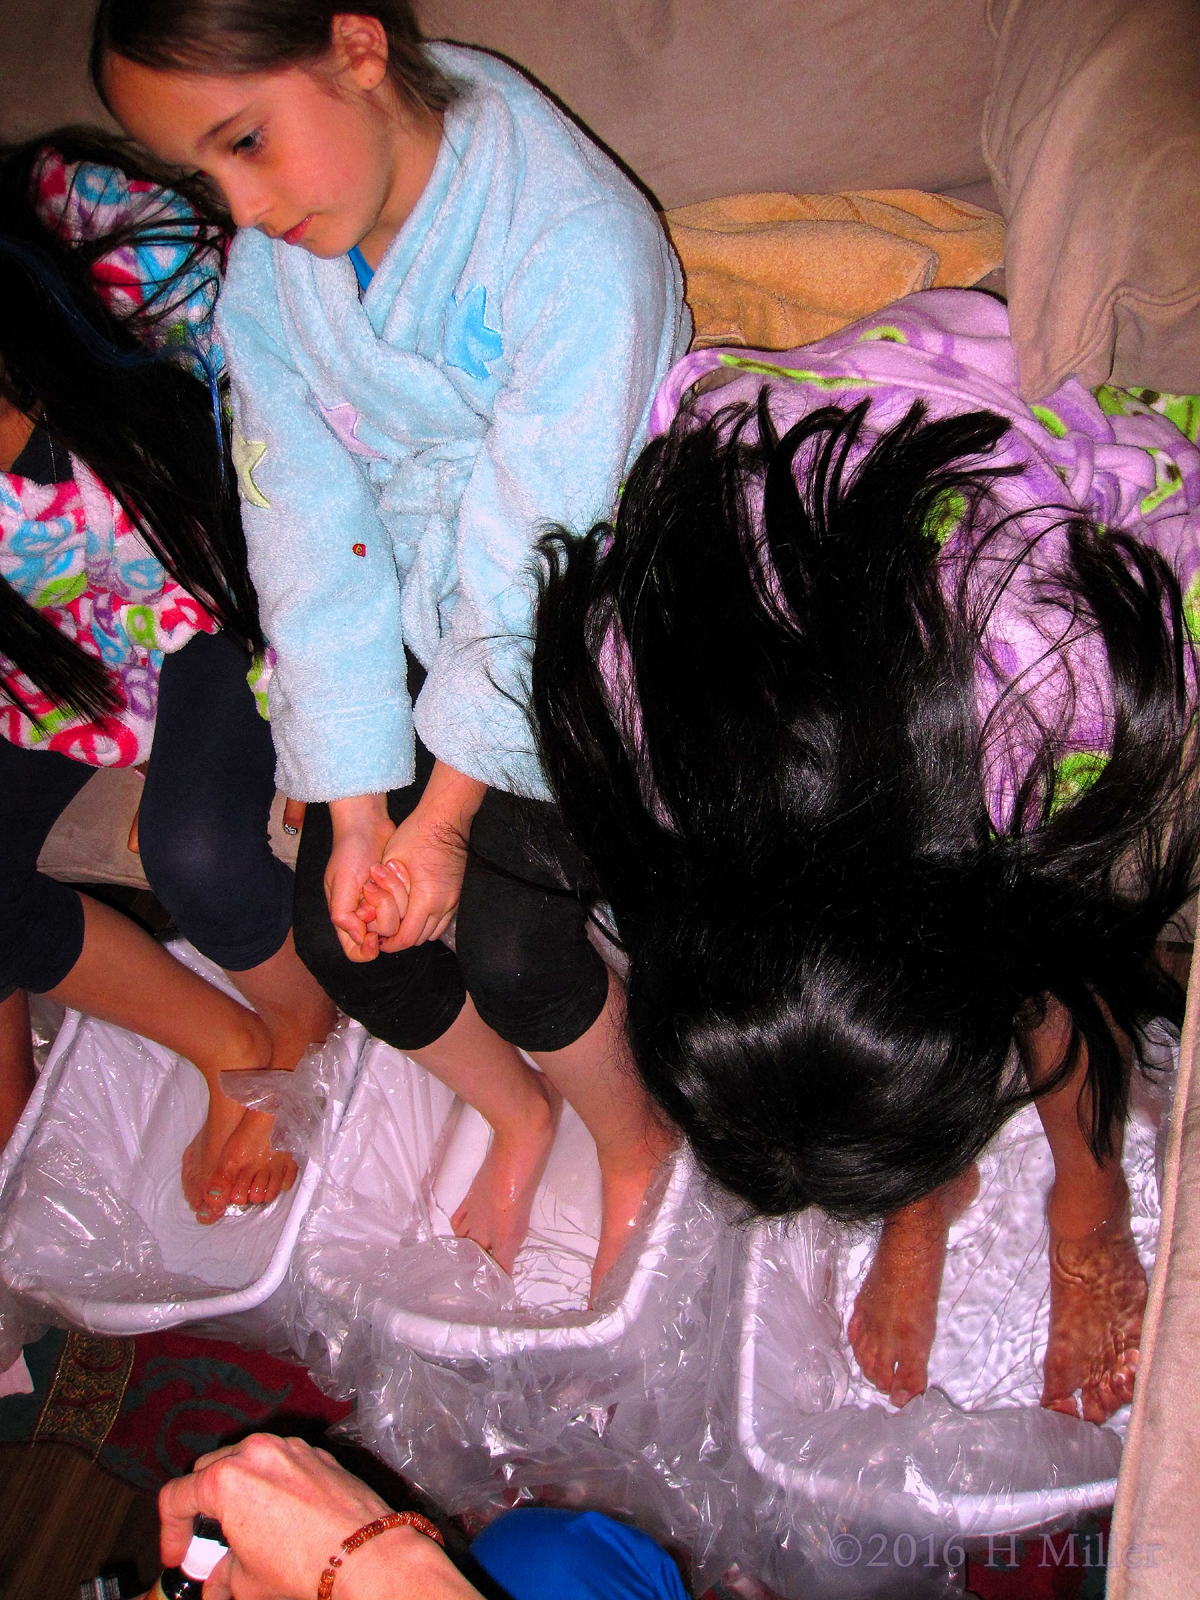 Each Girl Chooses Her Own Essential Oil For Her Footbath. Note The Liners For A Sanitary Time! 